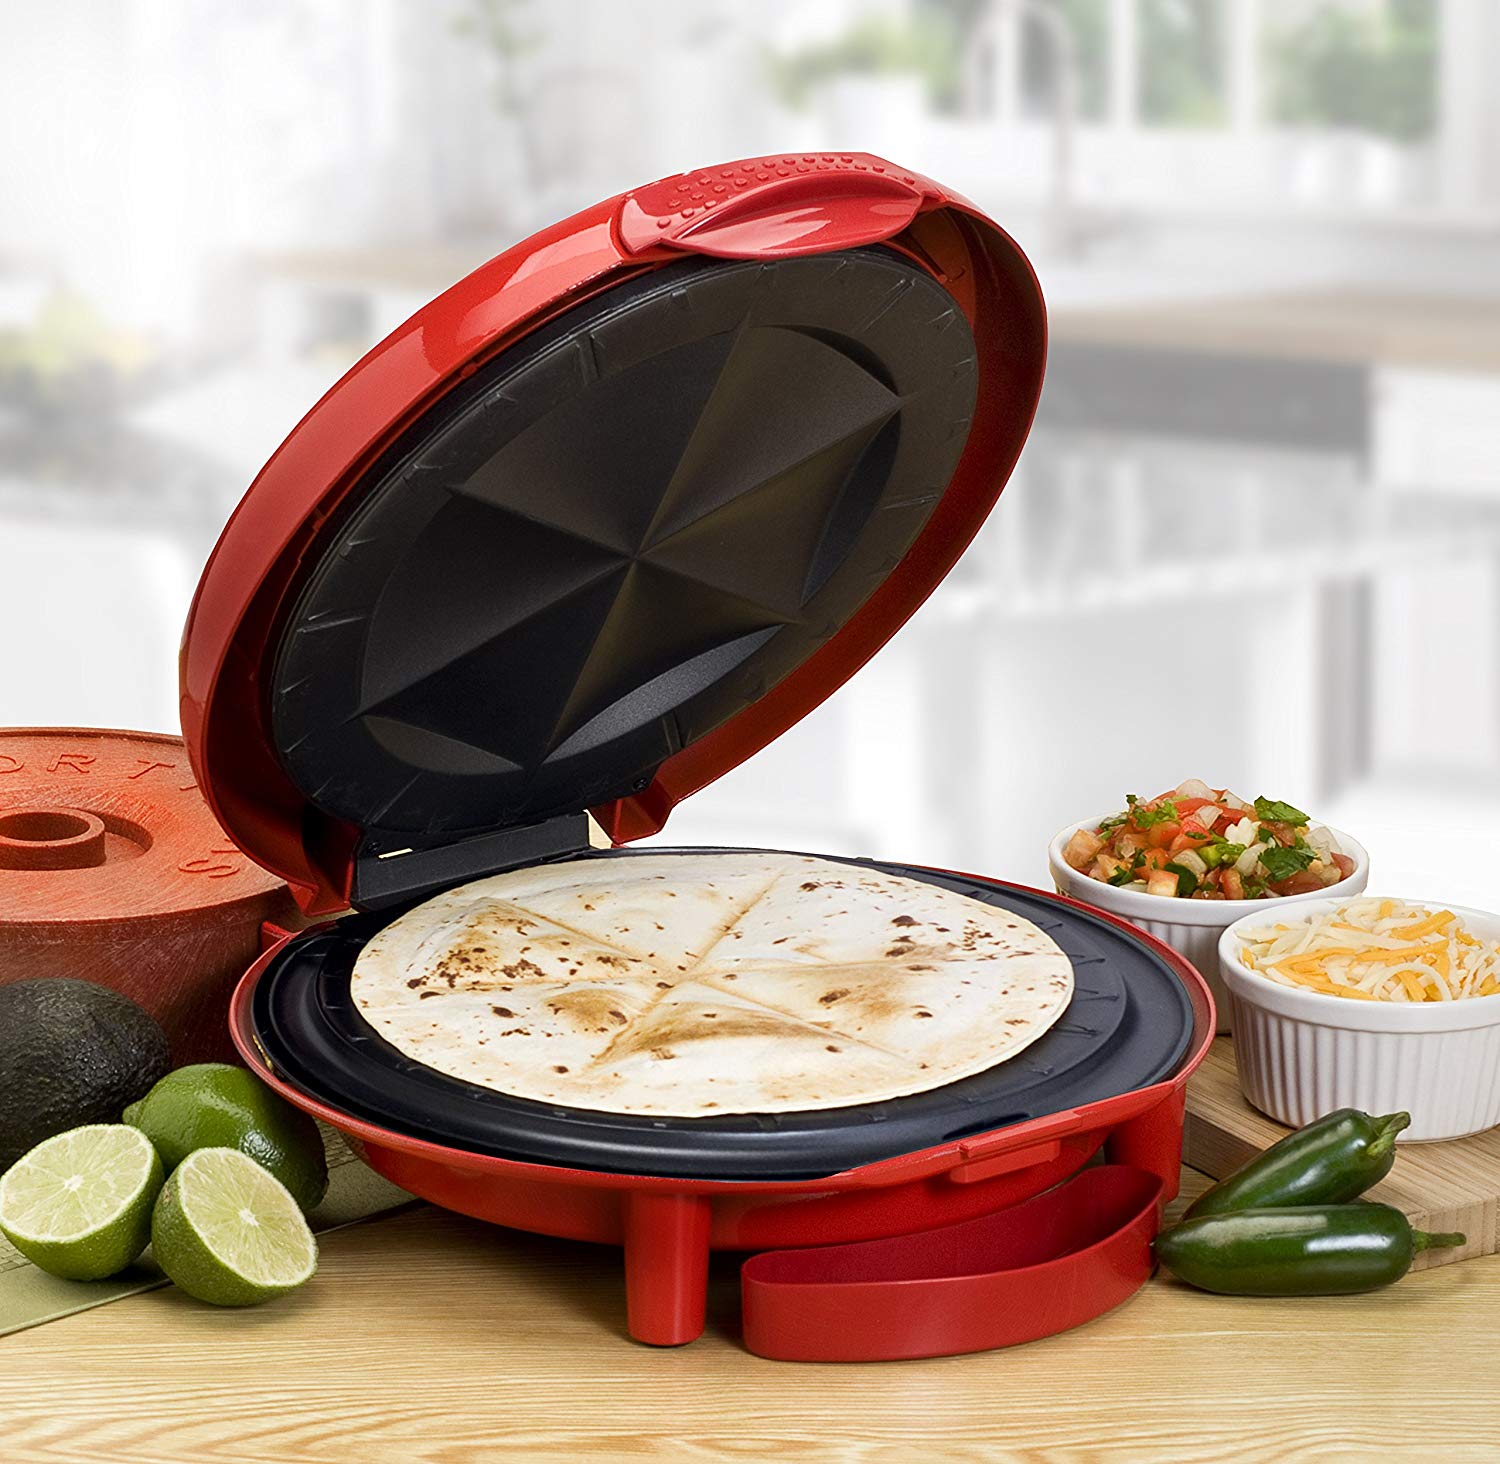 Elite Cuisine EQD-118 Makes 11 Inch Quesadillas With Ease In